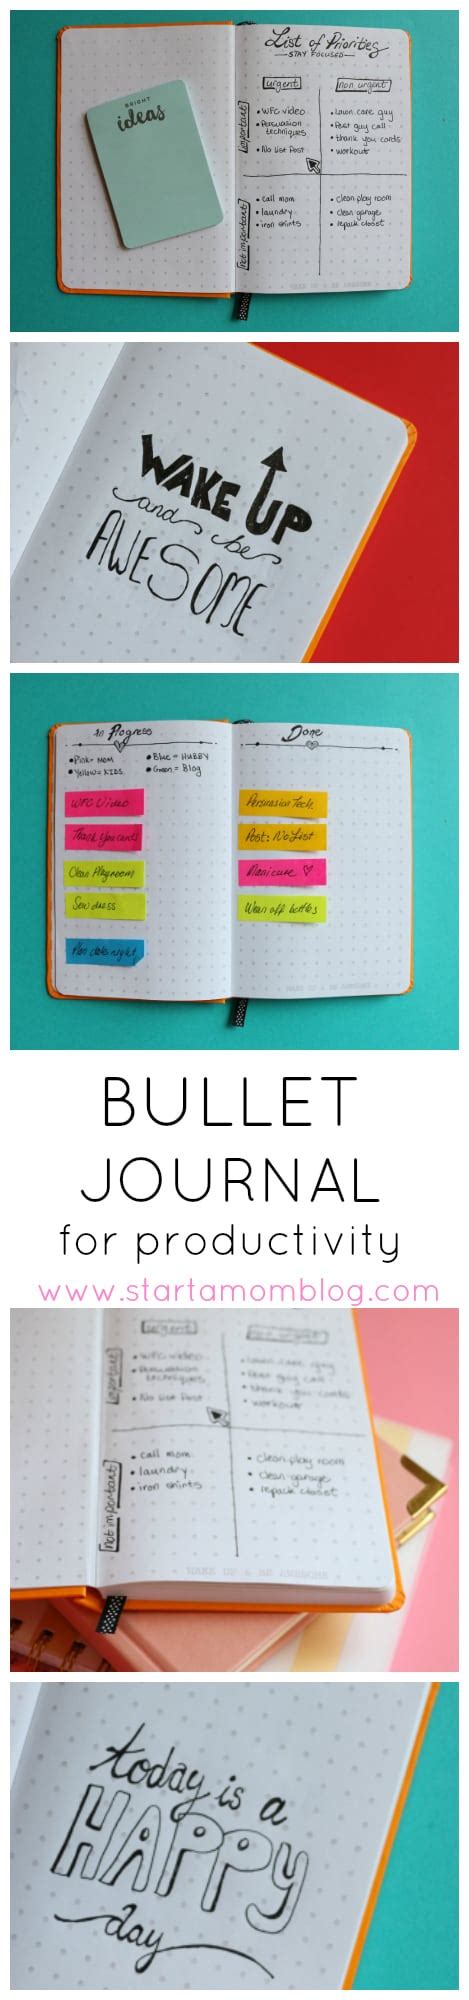 Bullet Journal How To Use It For Productivity Start A Mom Blog